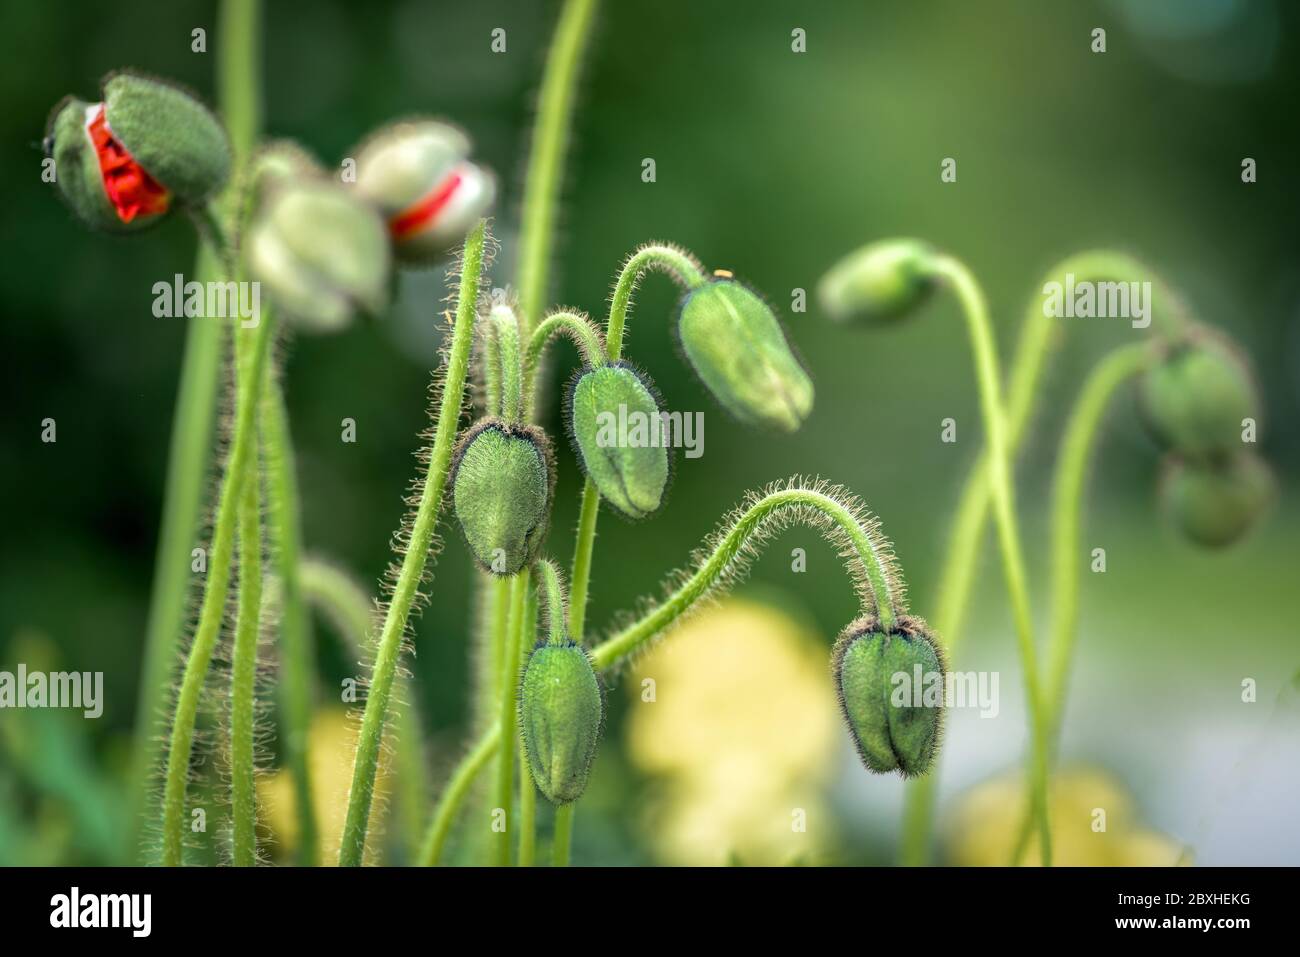 Bizarre shot of green buds of poppies with bokeh background Stock Photo